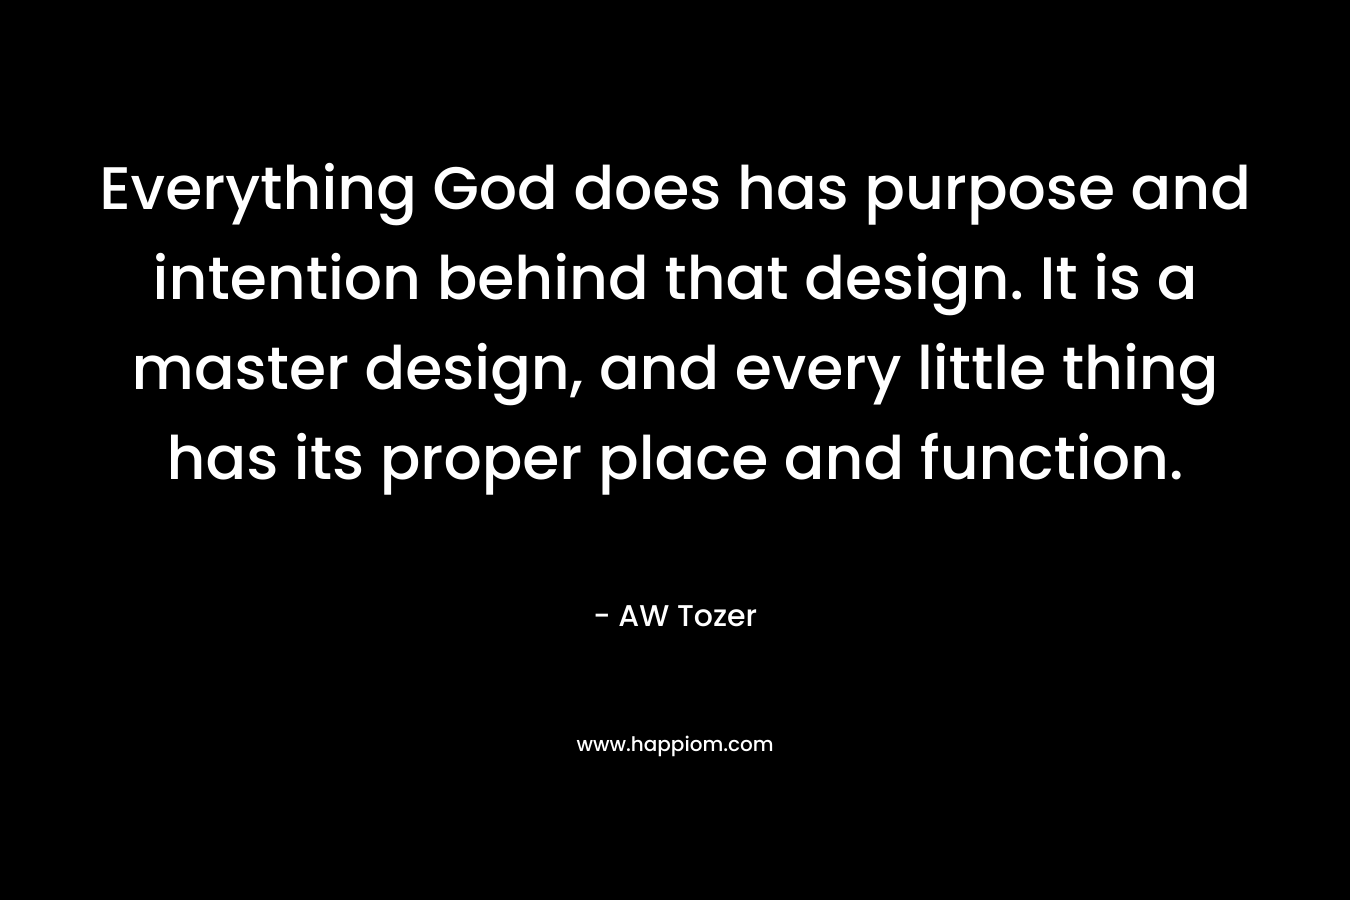 Everything God does has purpose and intention behind that design. It is a master design, and every little thing has its proper place and function. – AW Tozer